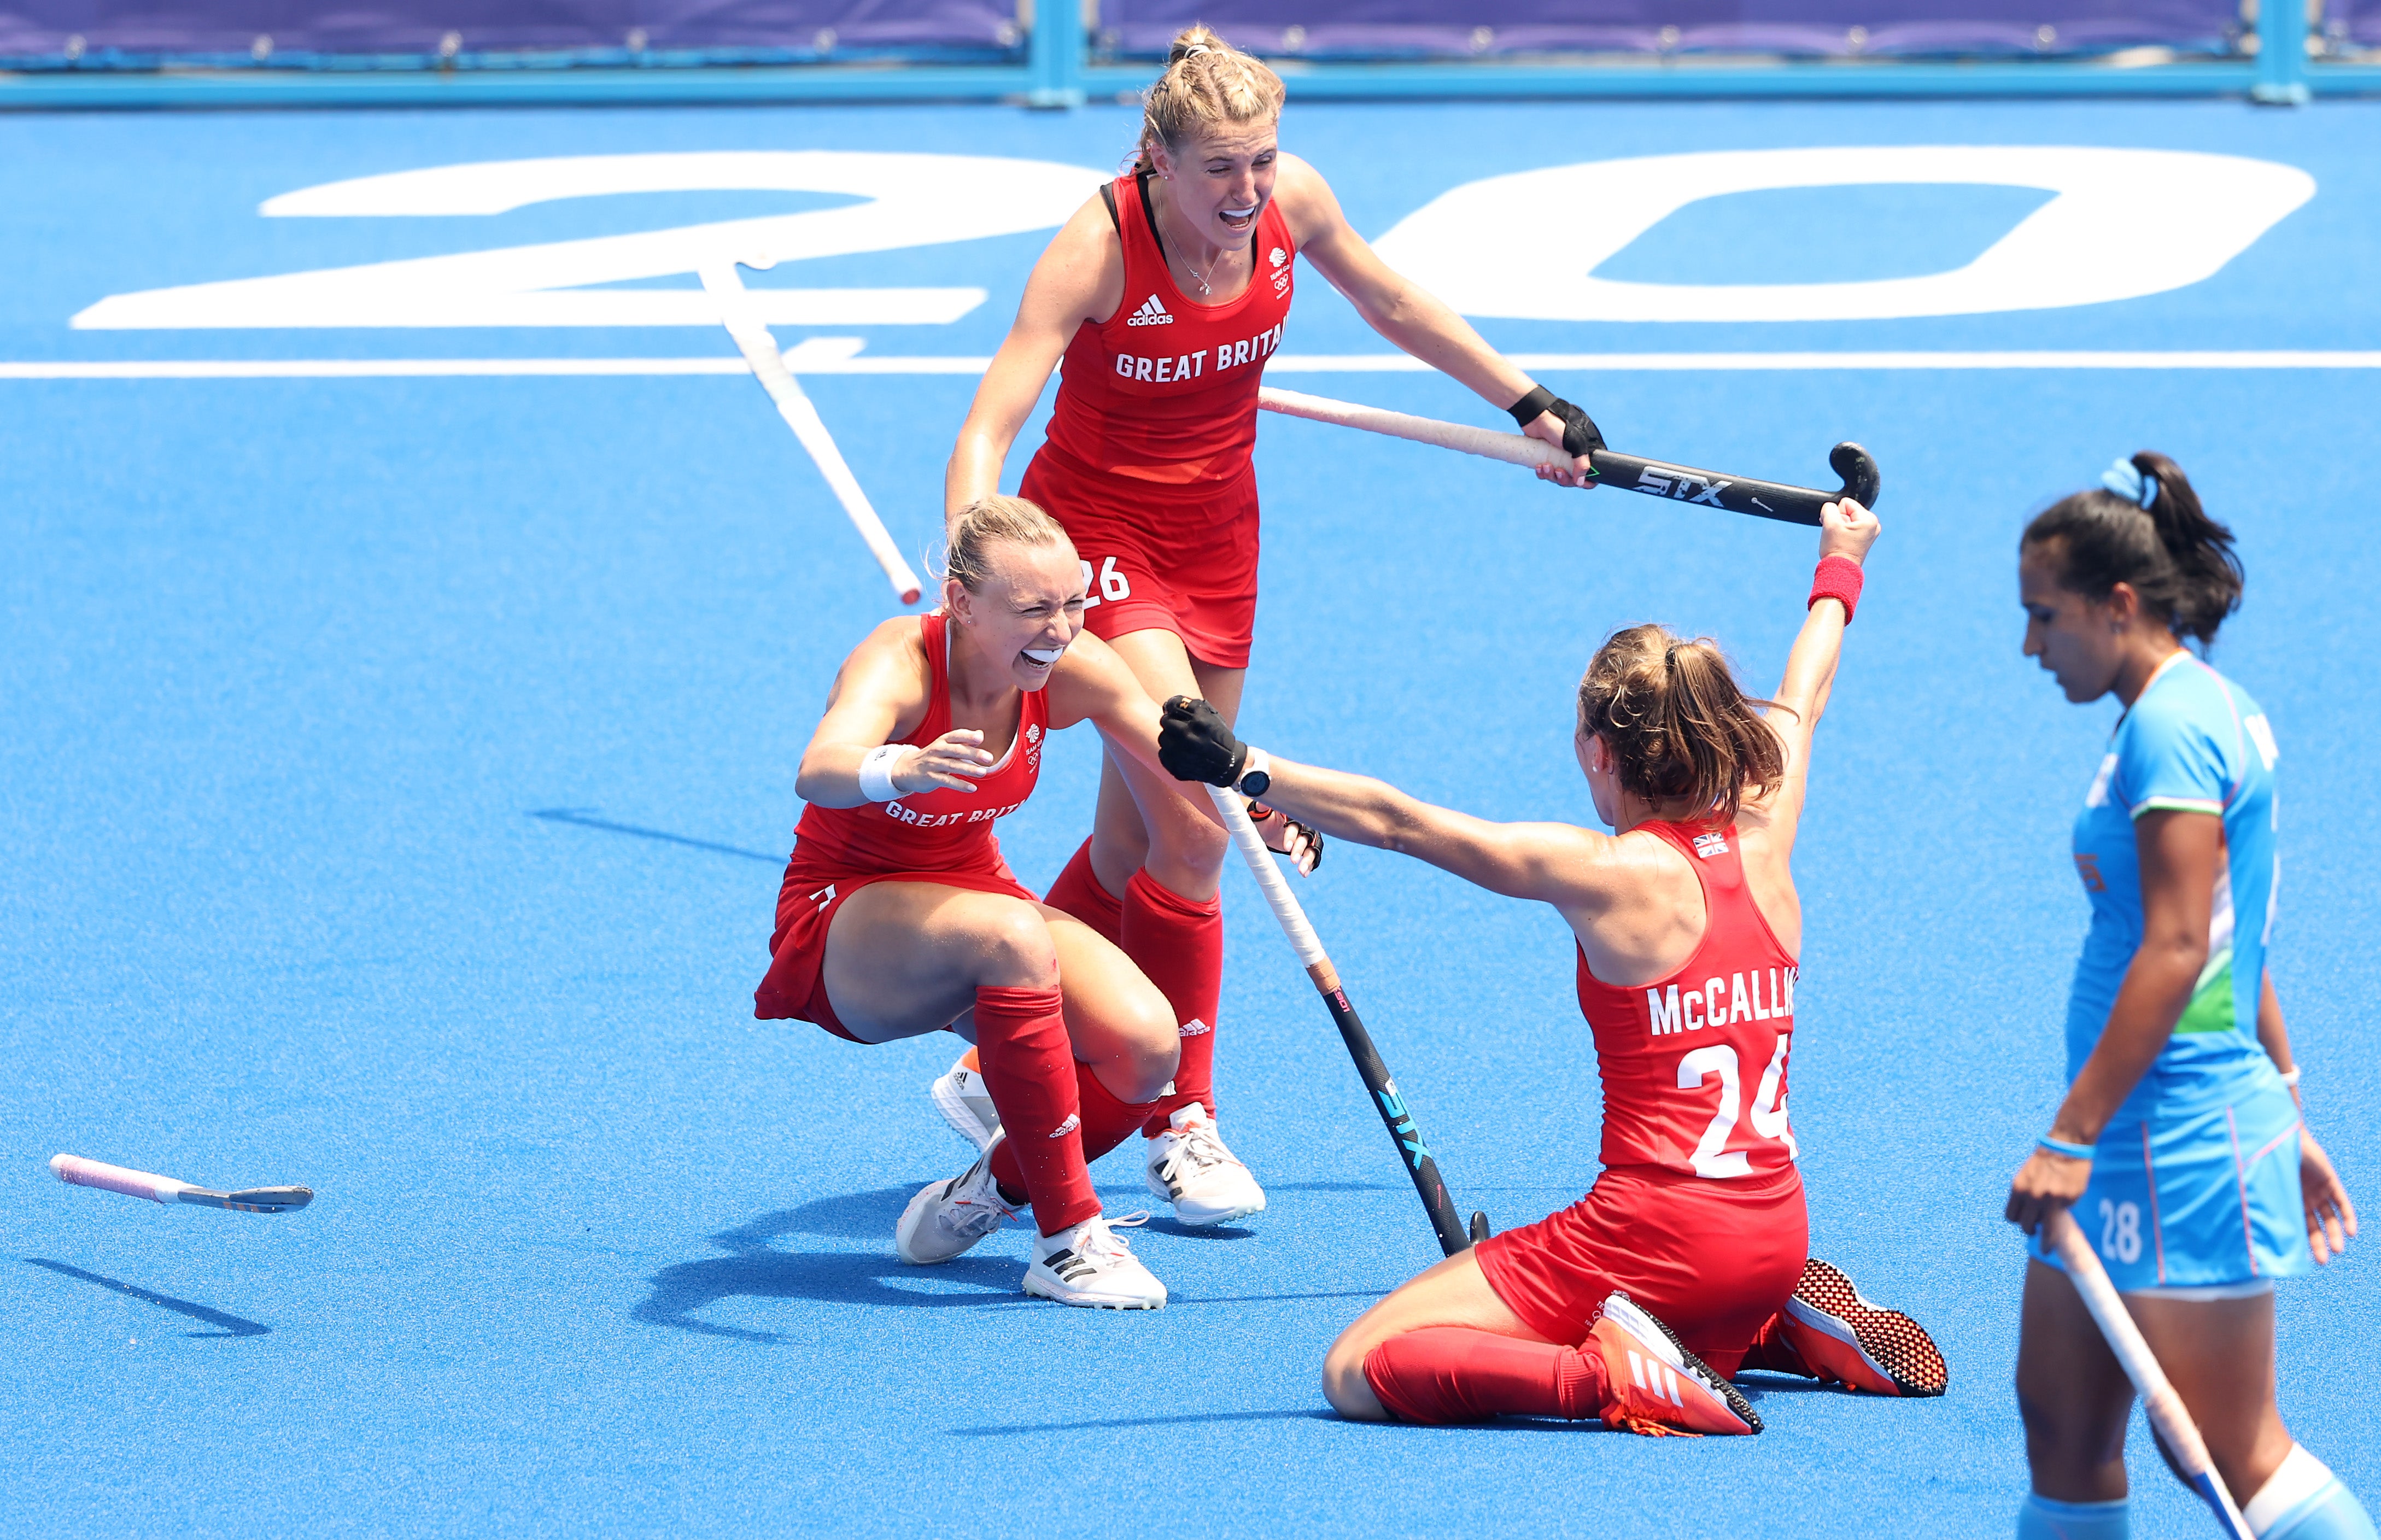 Shona McCallin and Lily Owsley of Team Great Britain celebrate after winning the Women’s Bronze medal match between Great Britain and India